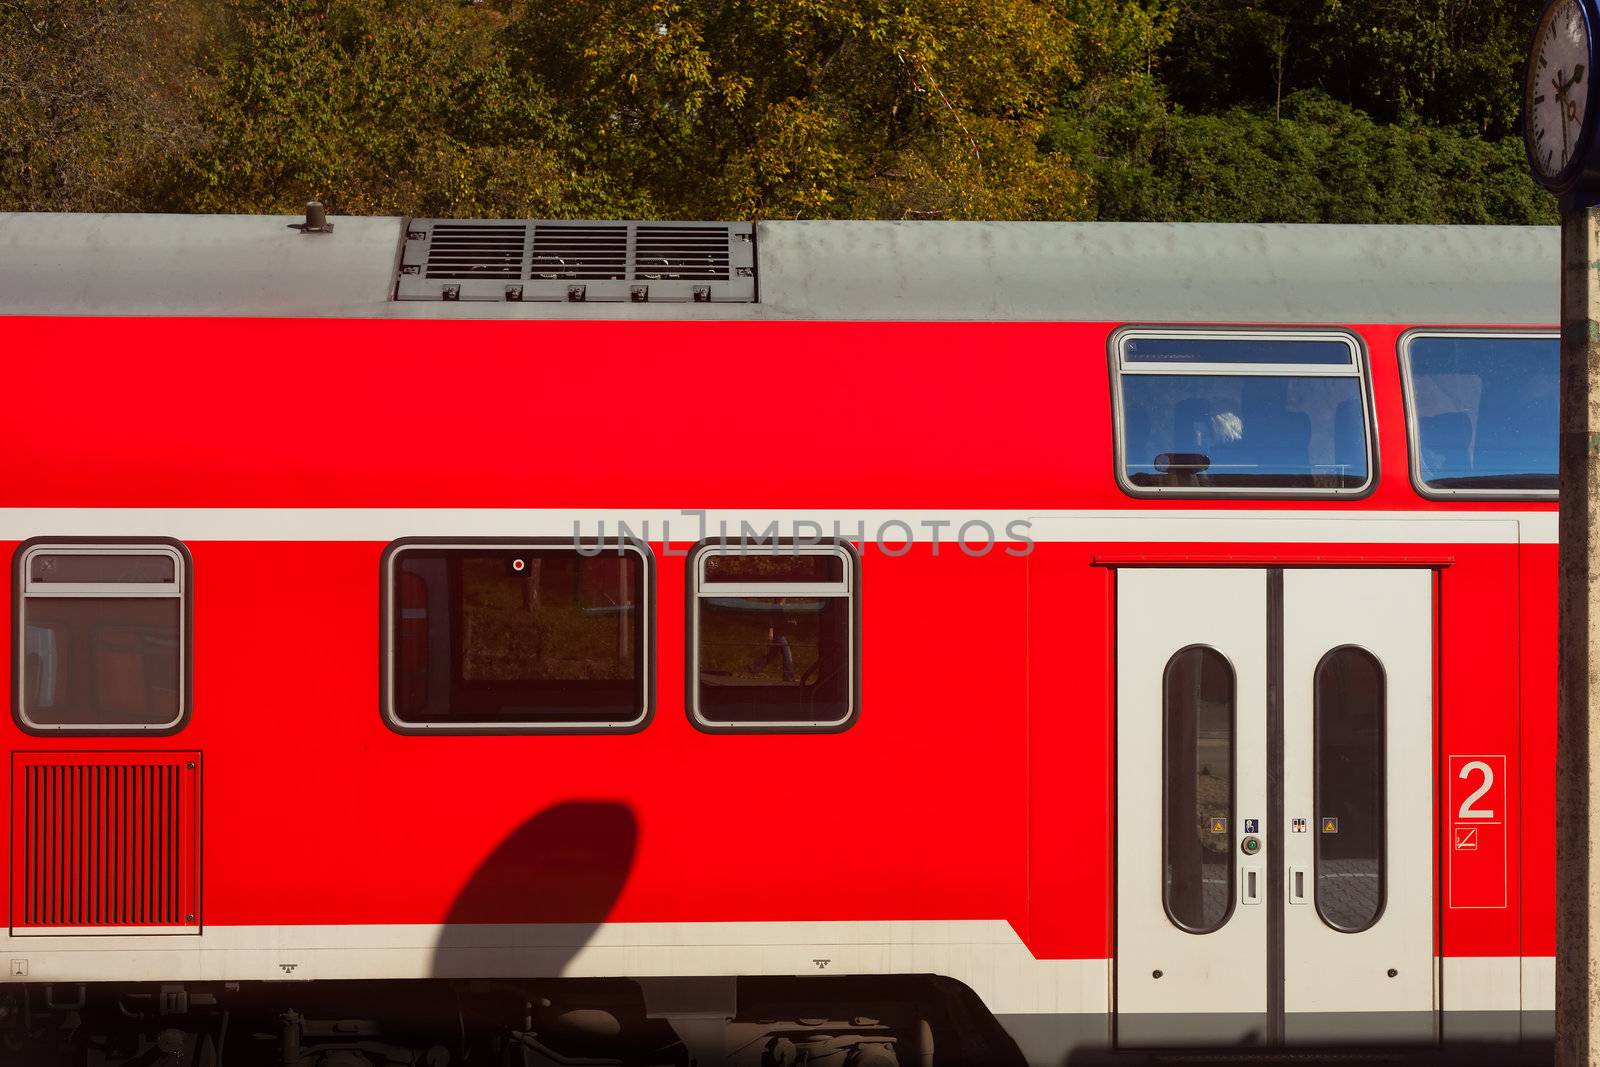 Passenger carriage of commuter train in Germany, Europe